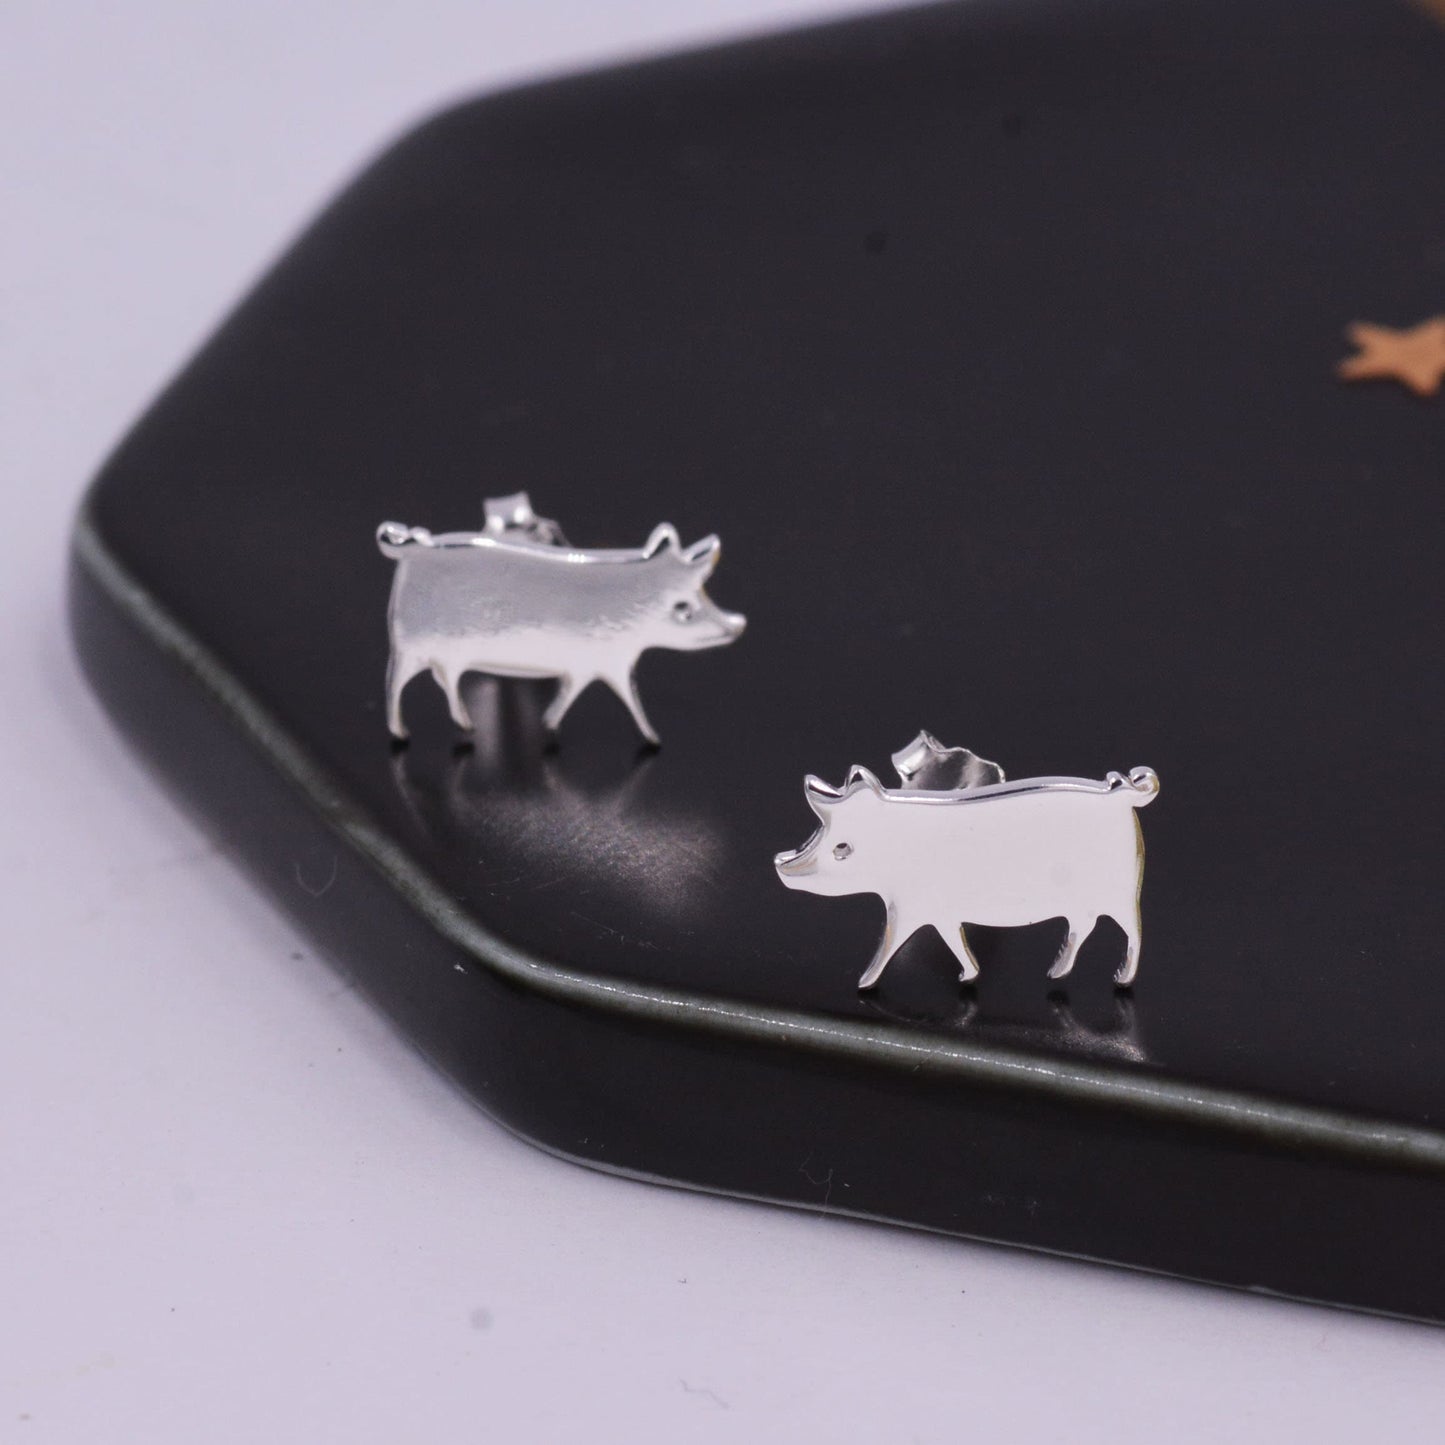 Pig Stud Earrings in Sterling Silver, Cute Fun Quirky, Jewellery Gift for Her, Animal Lover, Nature Inspired, Pigs Can Fly Stud L11